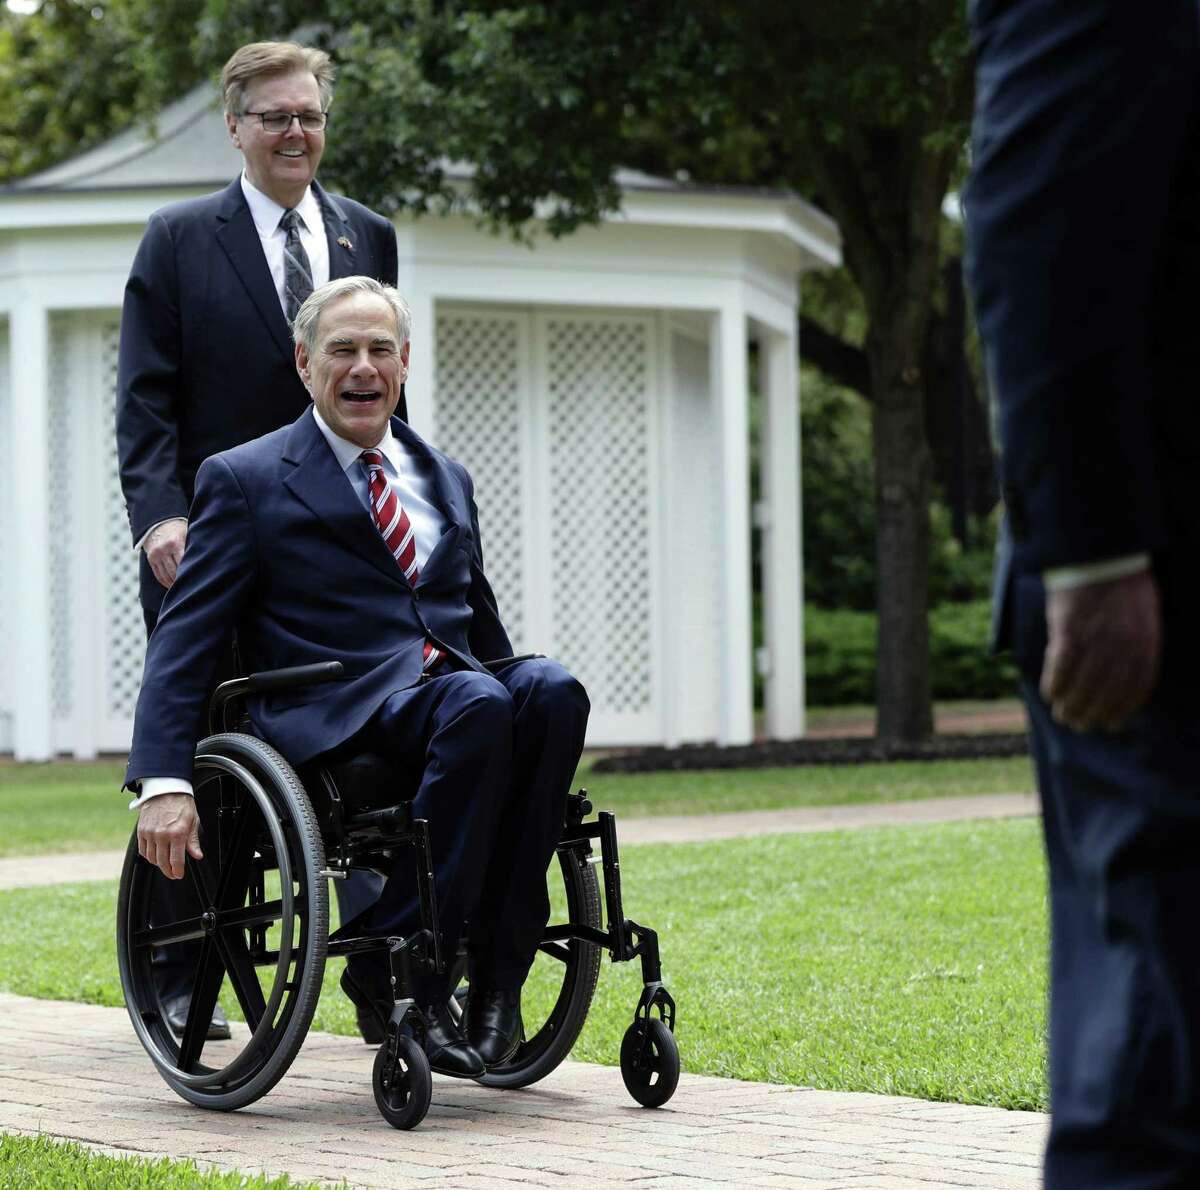 Gov. Greg Abbott, right, Lt. Governor Dan Patrick, center, and Speaker of the House Dennis Bonnen, left, arrive for a joint news conference to discuss teacher pay and school finance at the Texas Governor's Mansion in Austin, Texas, Thursday, May 23, 2019, in Austin. (AP Photo/Eric Gay)